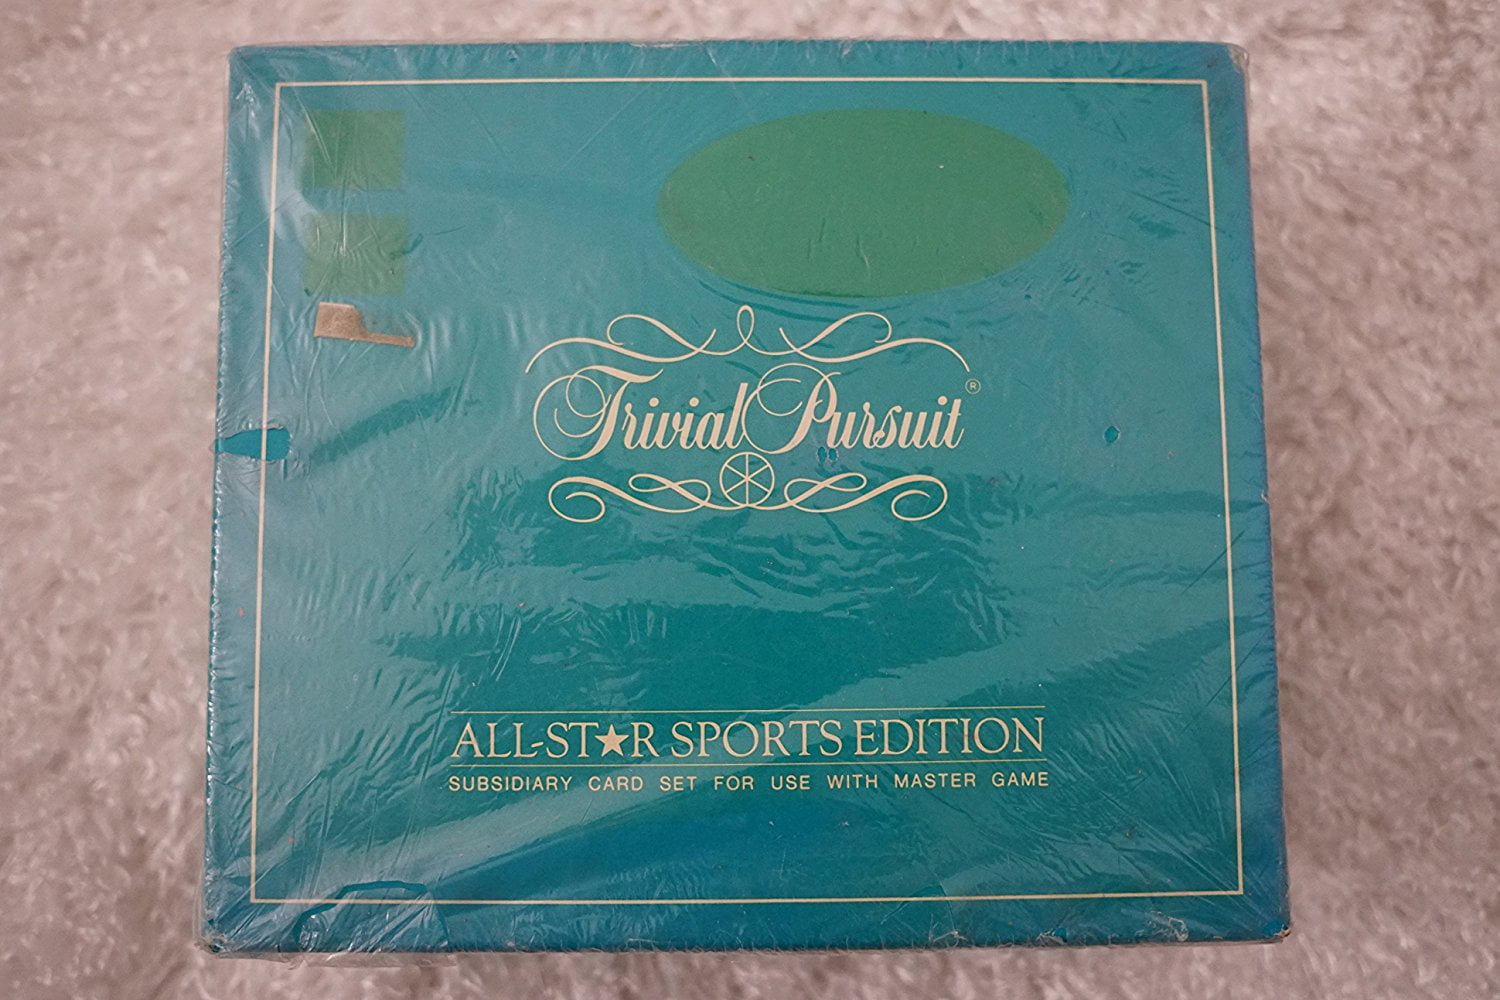 Trivial Pursuit All Star Sports Edition Trivia Game Subsidiary Card Set Gx15 for sale online 